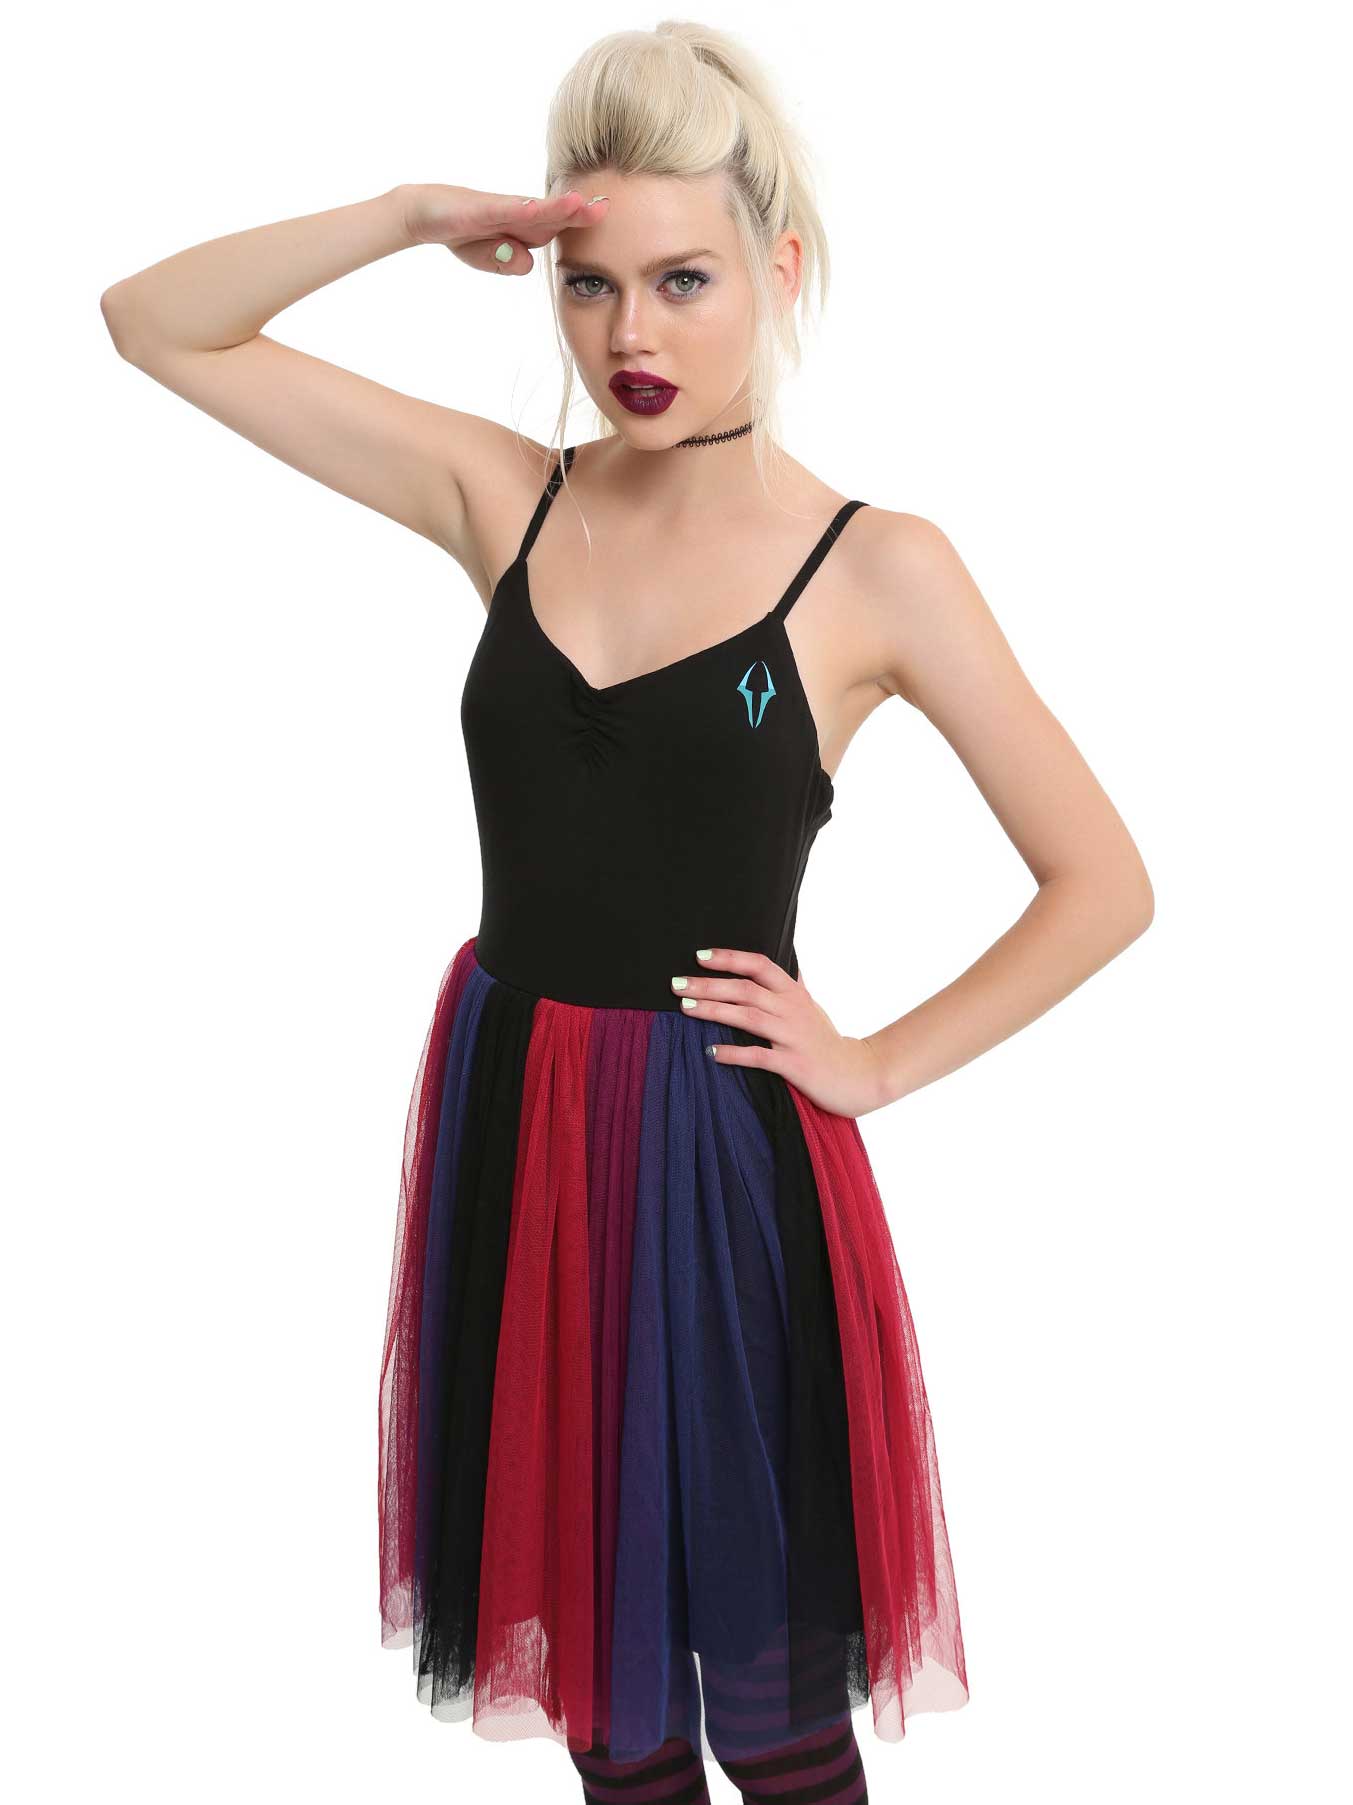 black tank dress with red and dark skirt